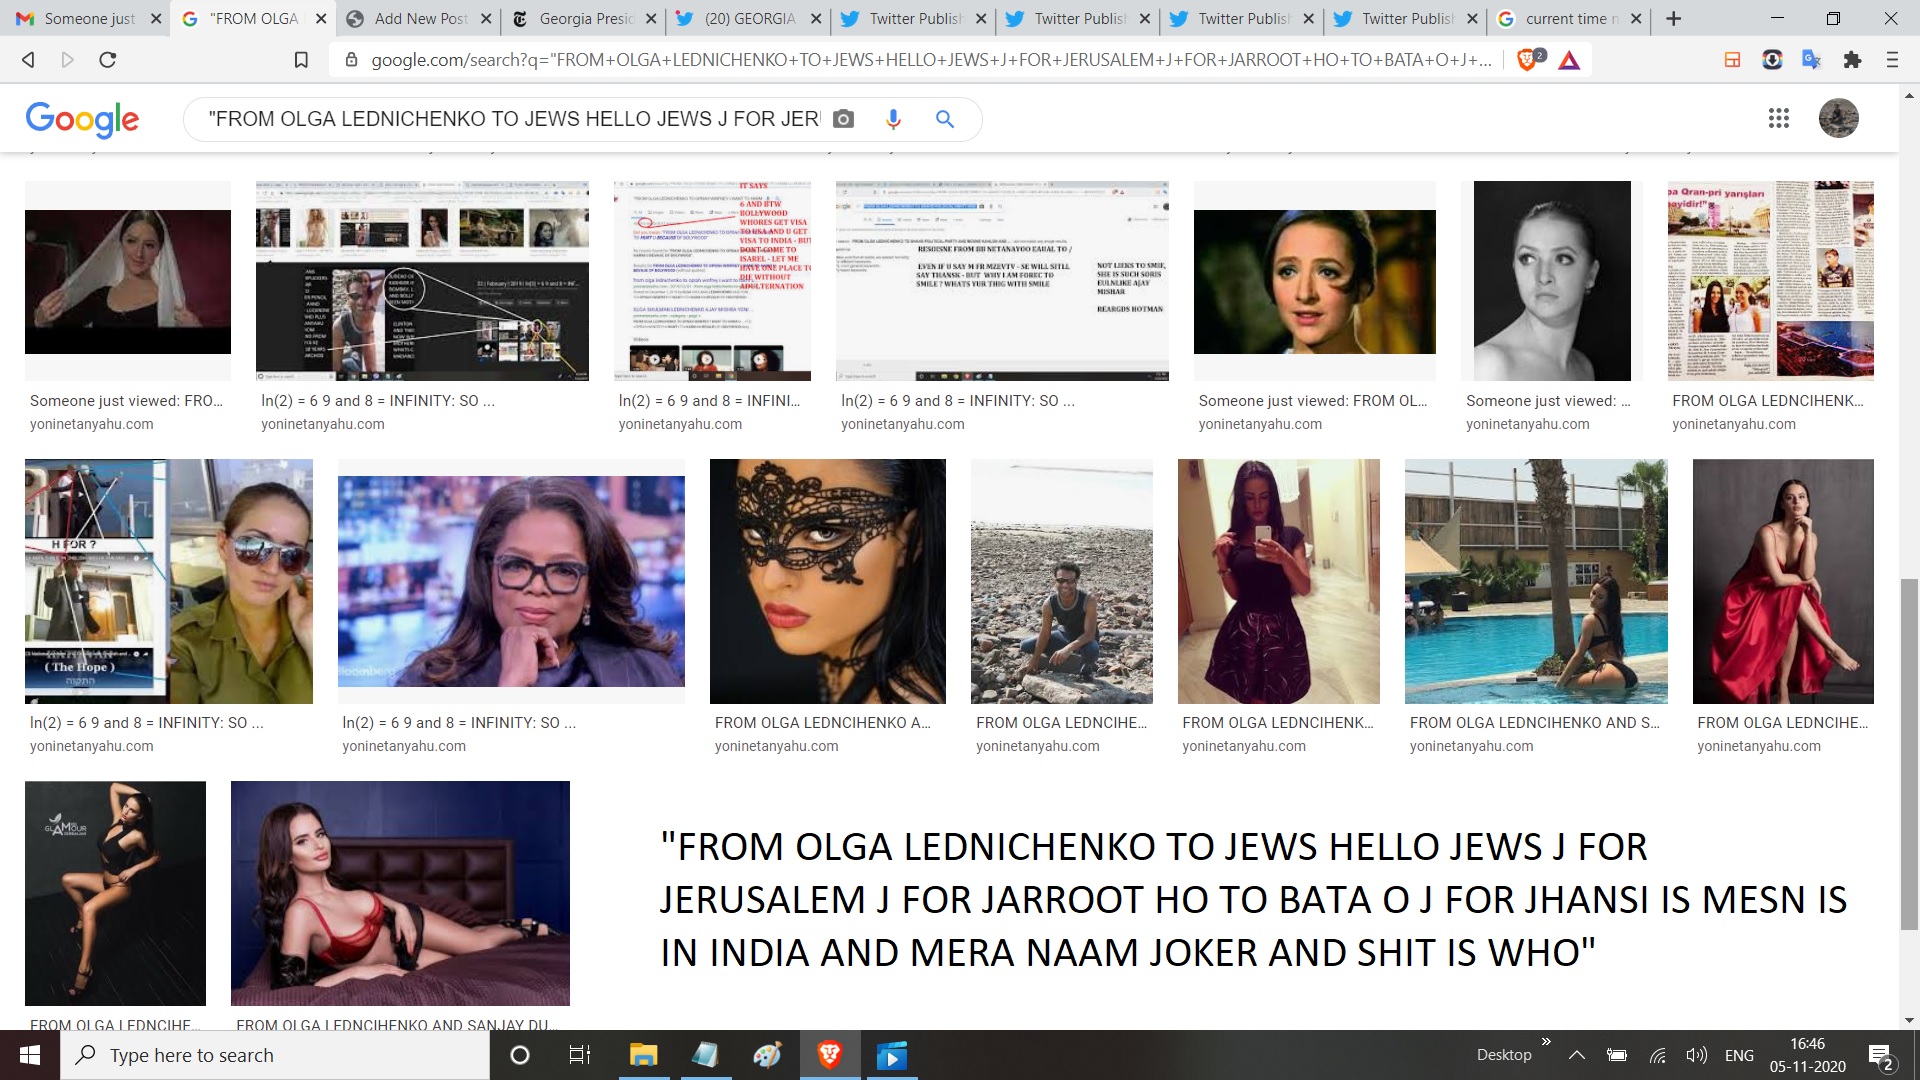 FROM OLGA LEDNICHENKO TO JEWS HELLO JEWS J FOR JERUSALEM J FOR JARROOT HO TO BATA O J FOR JHANSI IS MESN IS IN INDIA AND MERA NAAM JOKER AND SHIT IS WHO